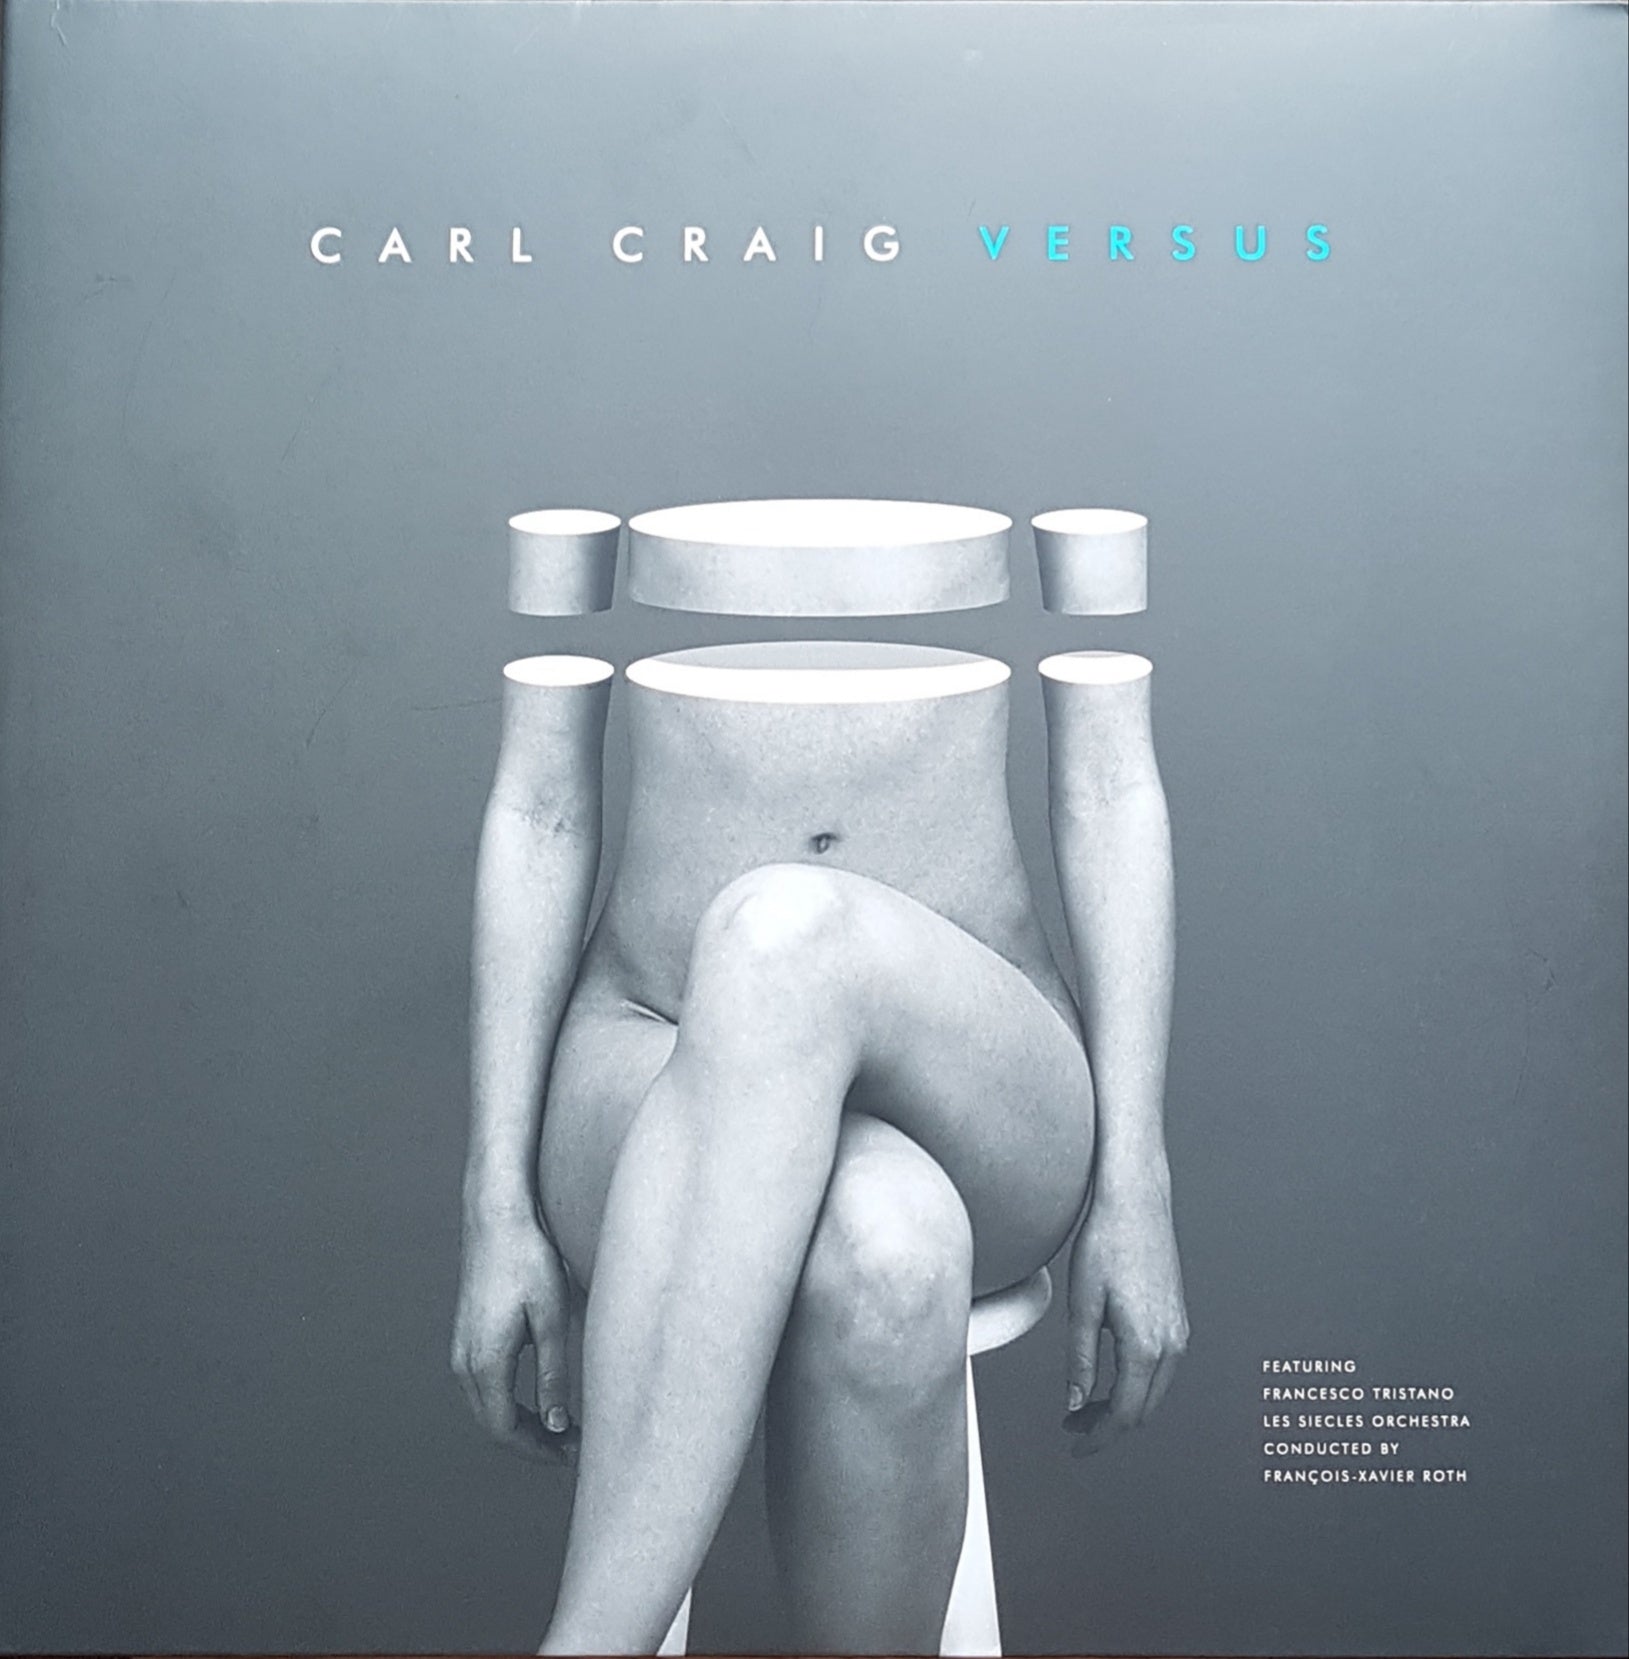 Carl Craig ‎– Versus - New 3 LP Record 2017 Limited Edition Vinyl & Download - Electronic / Classical / Techno